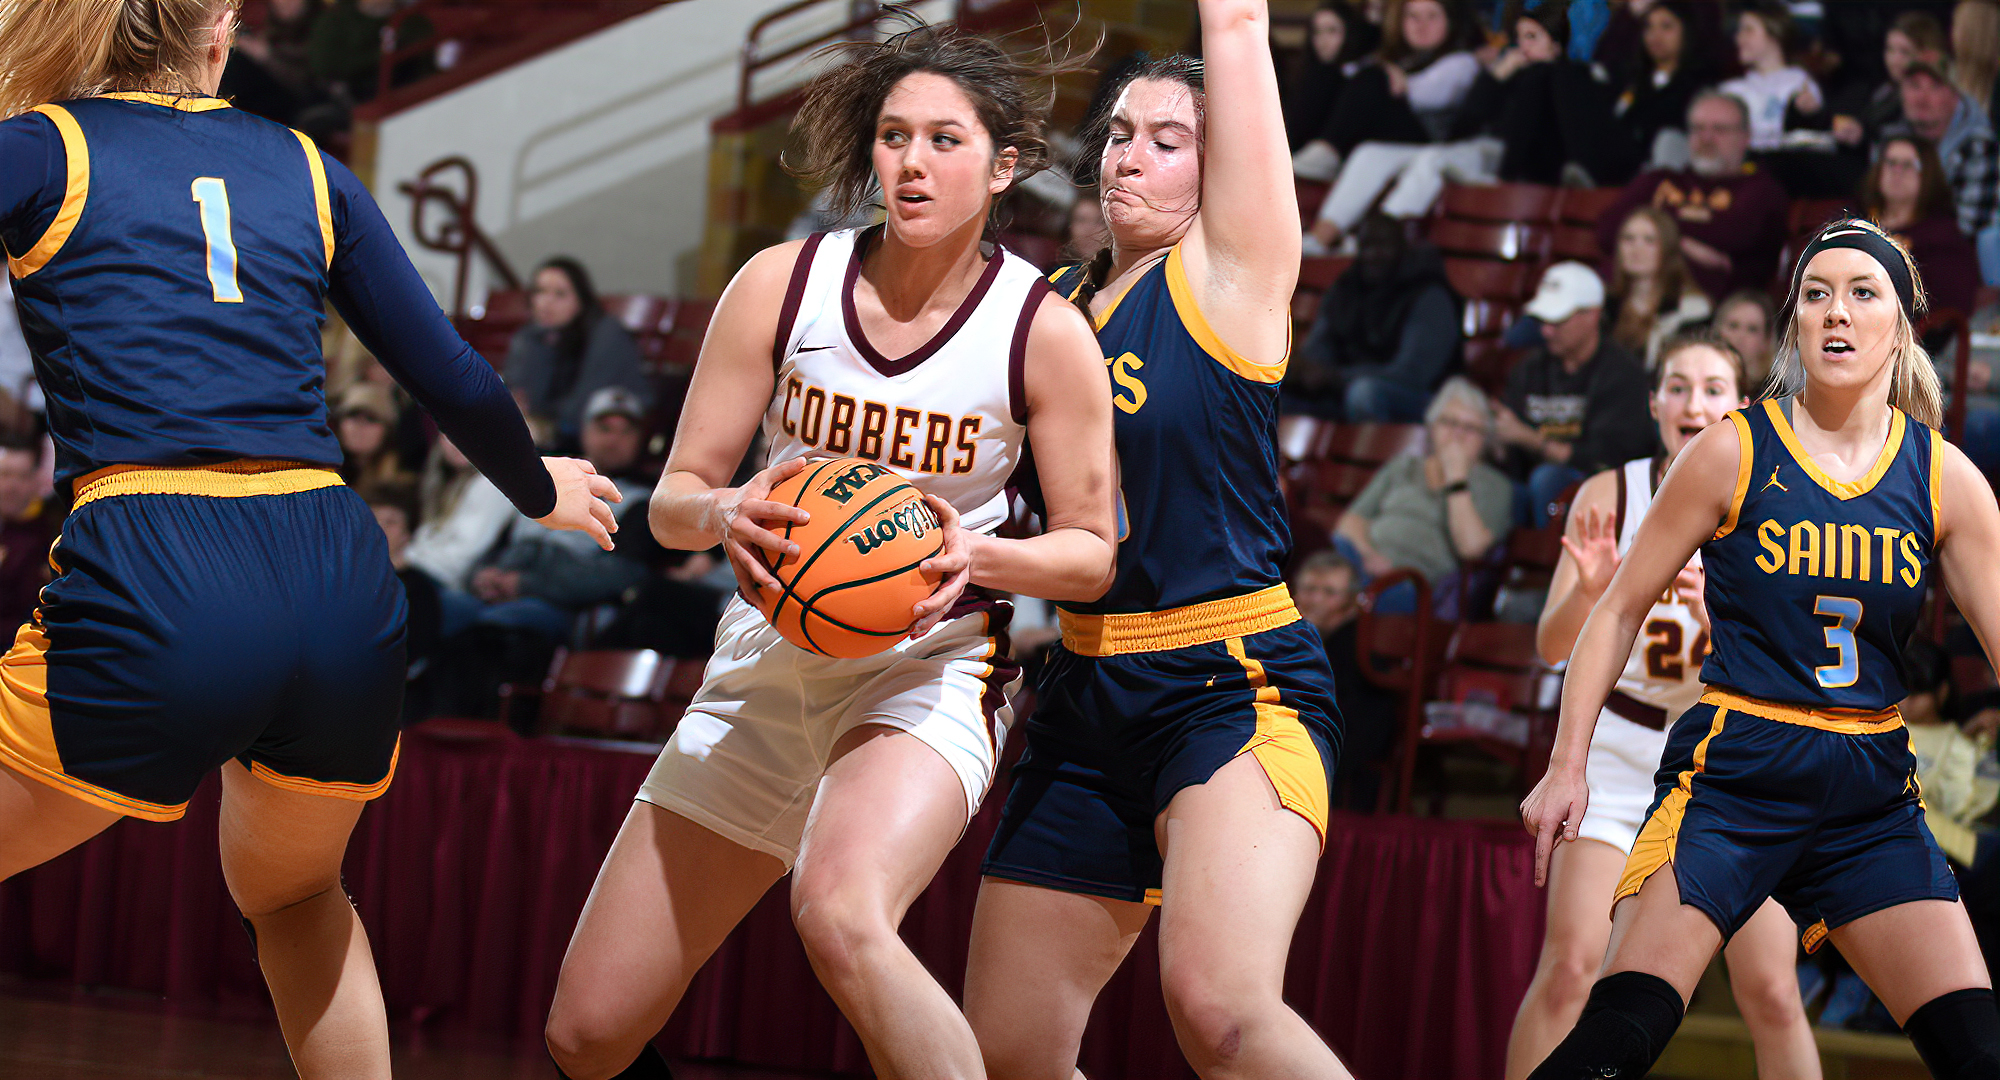 Makayla Anderson gets the ball in the post during the first half of the Cobbers' win over St. Scholastica. Anderson scored a game-high 17 points.